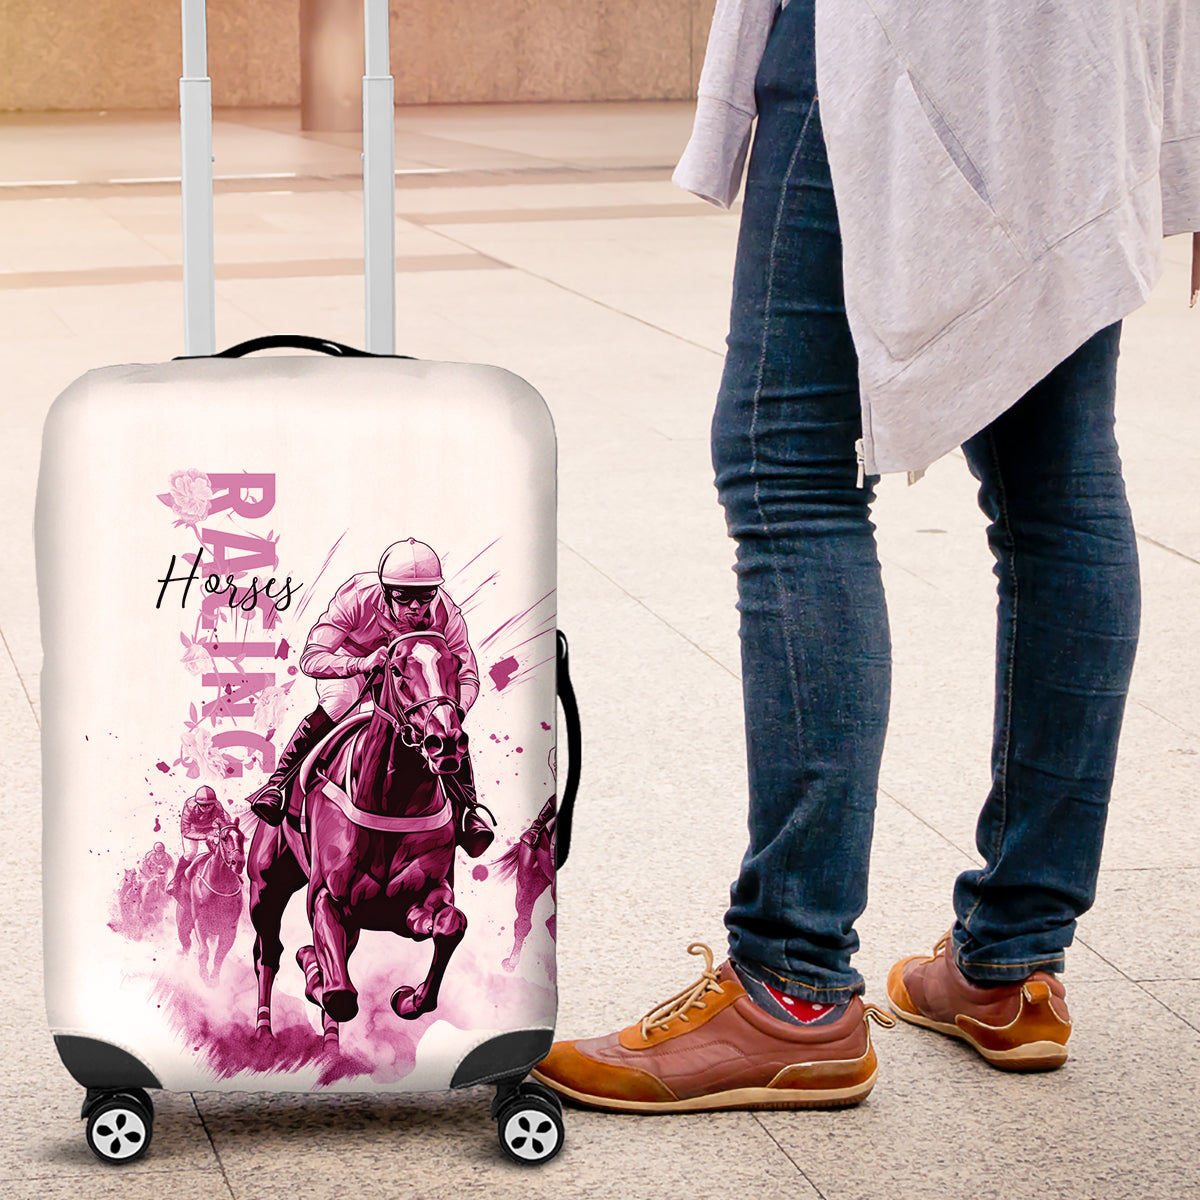 Kentucky Horses Racing Luggage Cover Jockey Drawing Style Pink Out Color